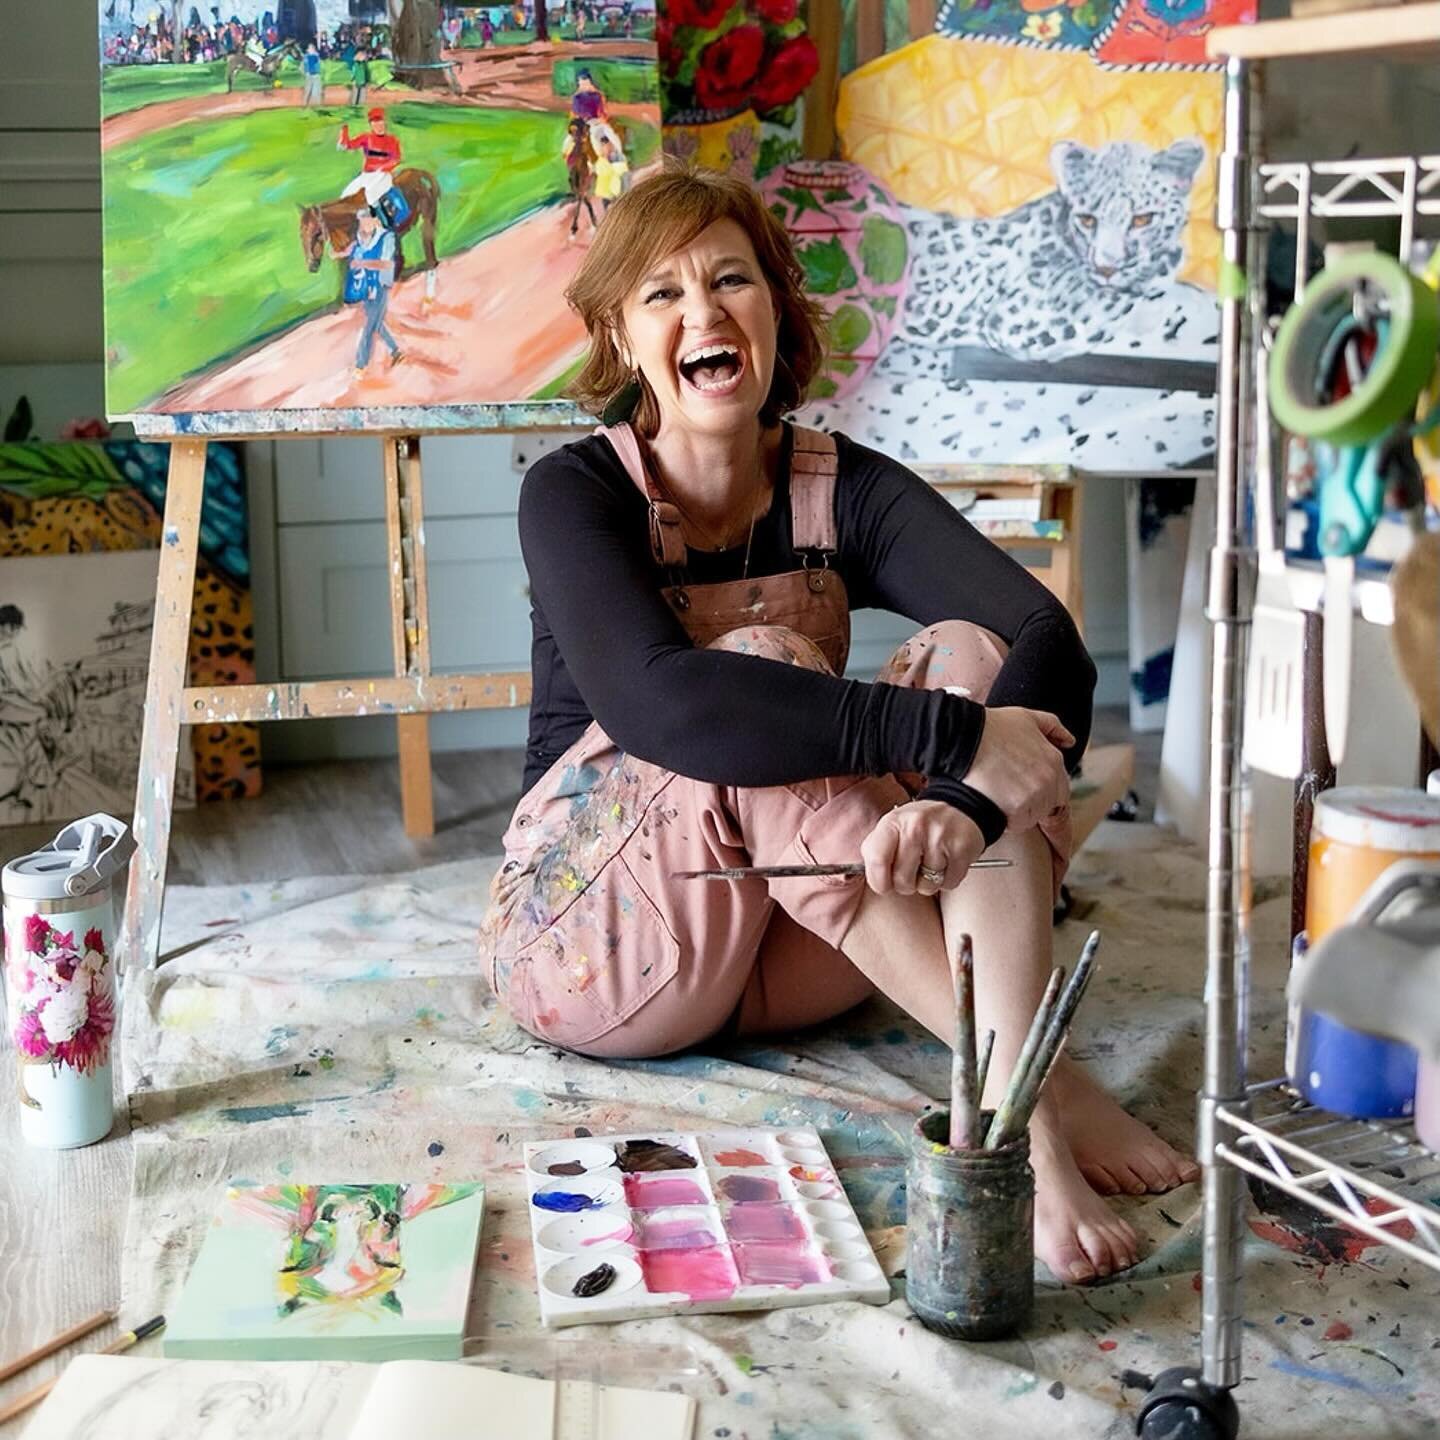 @martyosbournodaniel invited me into her beautiful studio to photograph her in her element.

After decades as a nurse a director of a major clinical research site Marty discovered a new passion for creating fine art in 2017 and has been recognized as